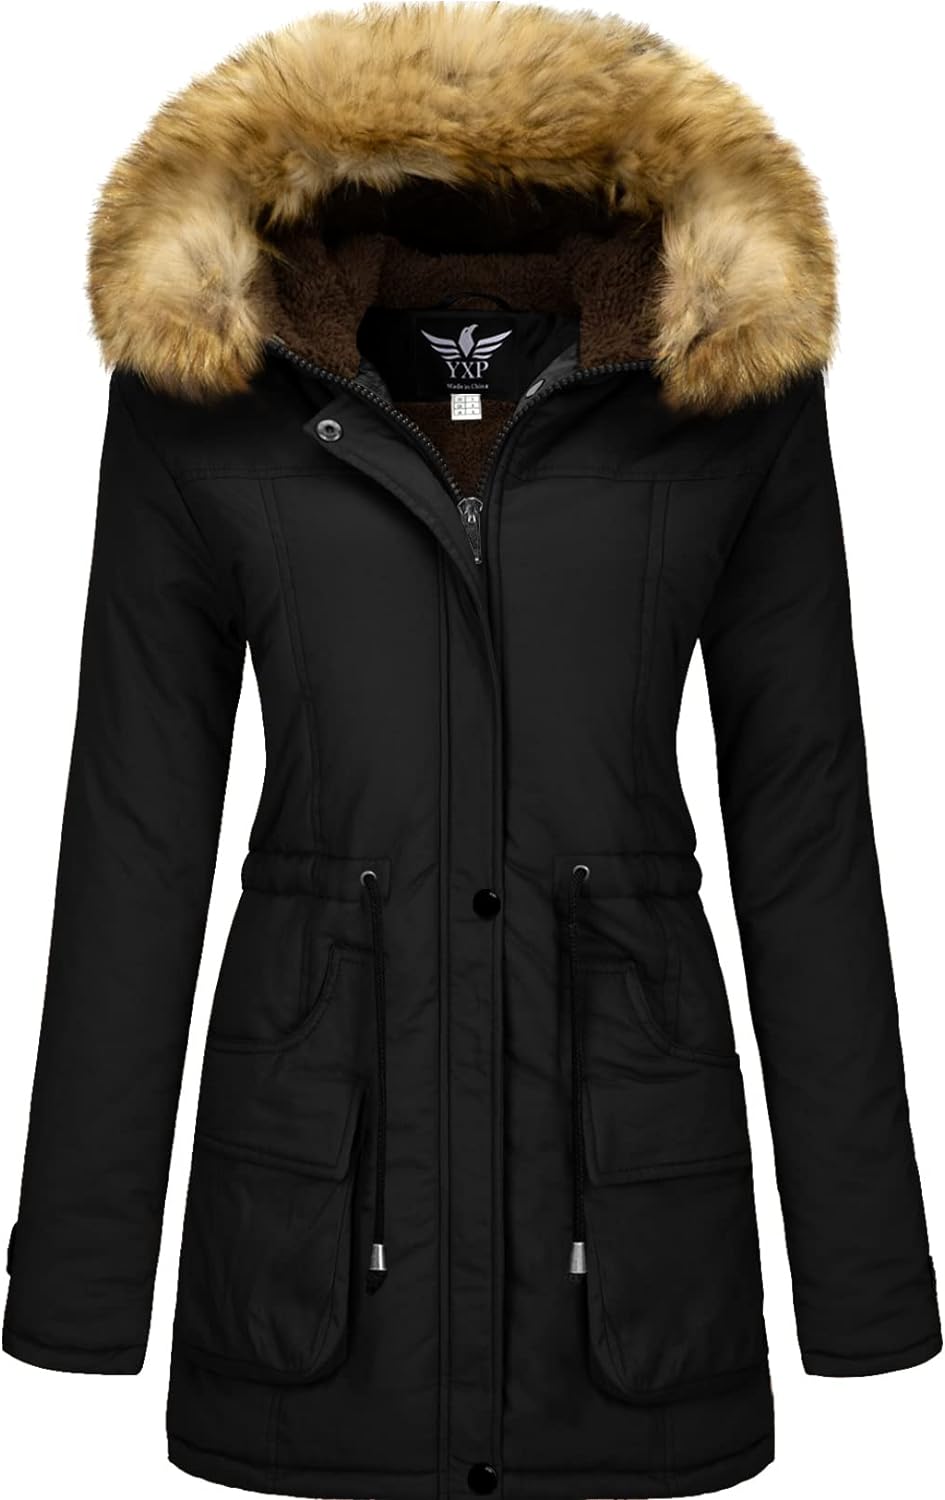 Limited-Time Discounts! Save 39% on YXP Women's Winter Thicken Military Parka Jacket